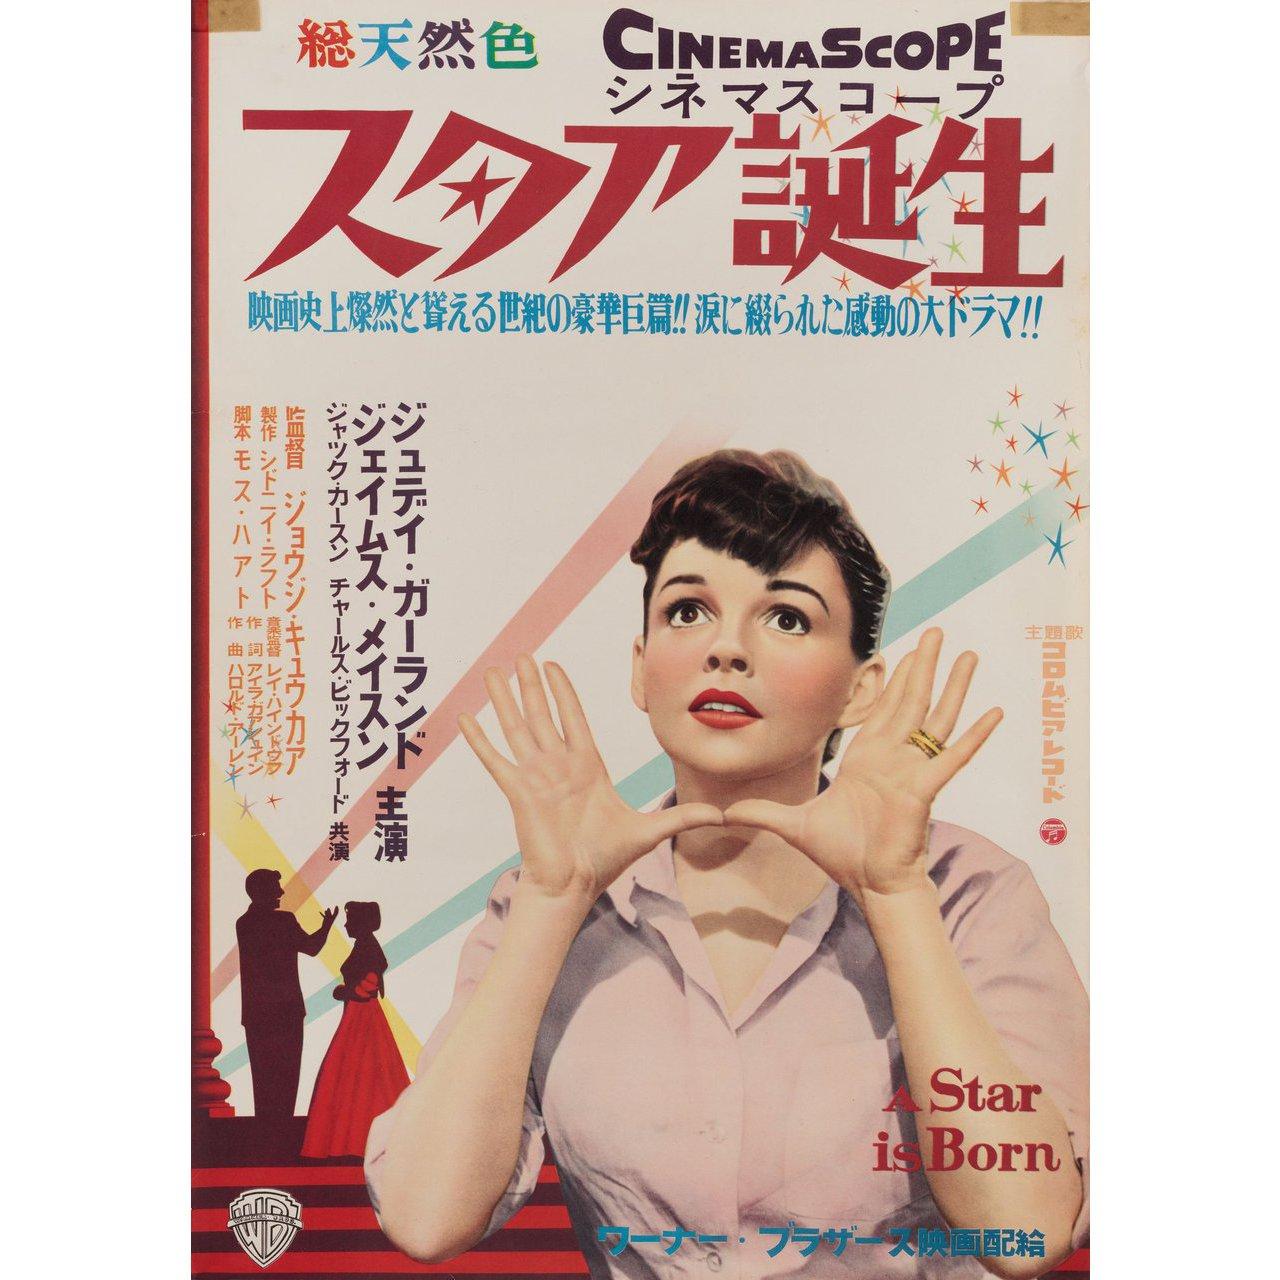 Original 1954 Japanese B2 poster for the film A Star Is Born directed by George Cukor with Judy Garland / James Mason / Jack Carson / Charles Bickford. Very Good-Fine condition, rolled with tape stains. Please note: the size is stated in inches and